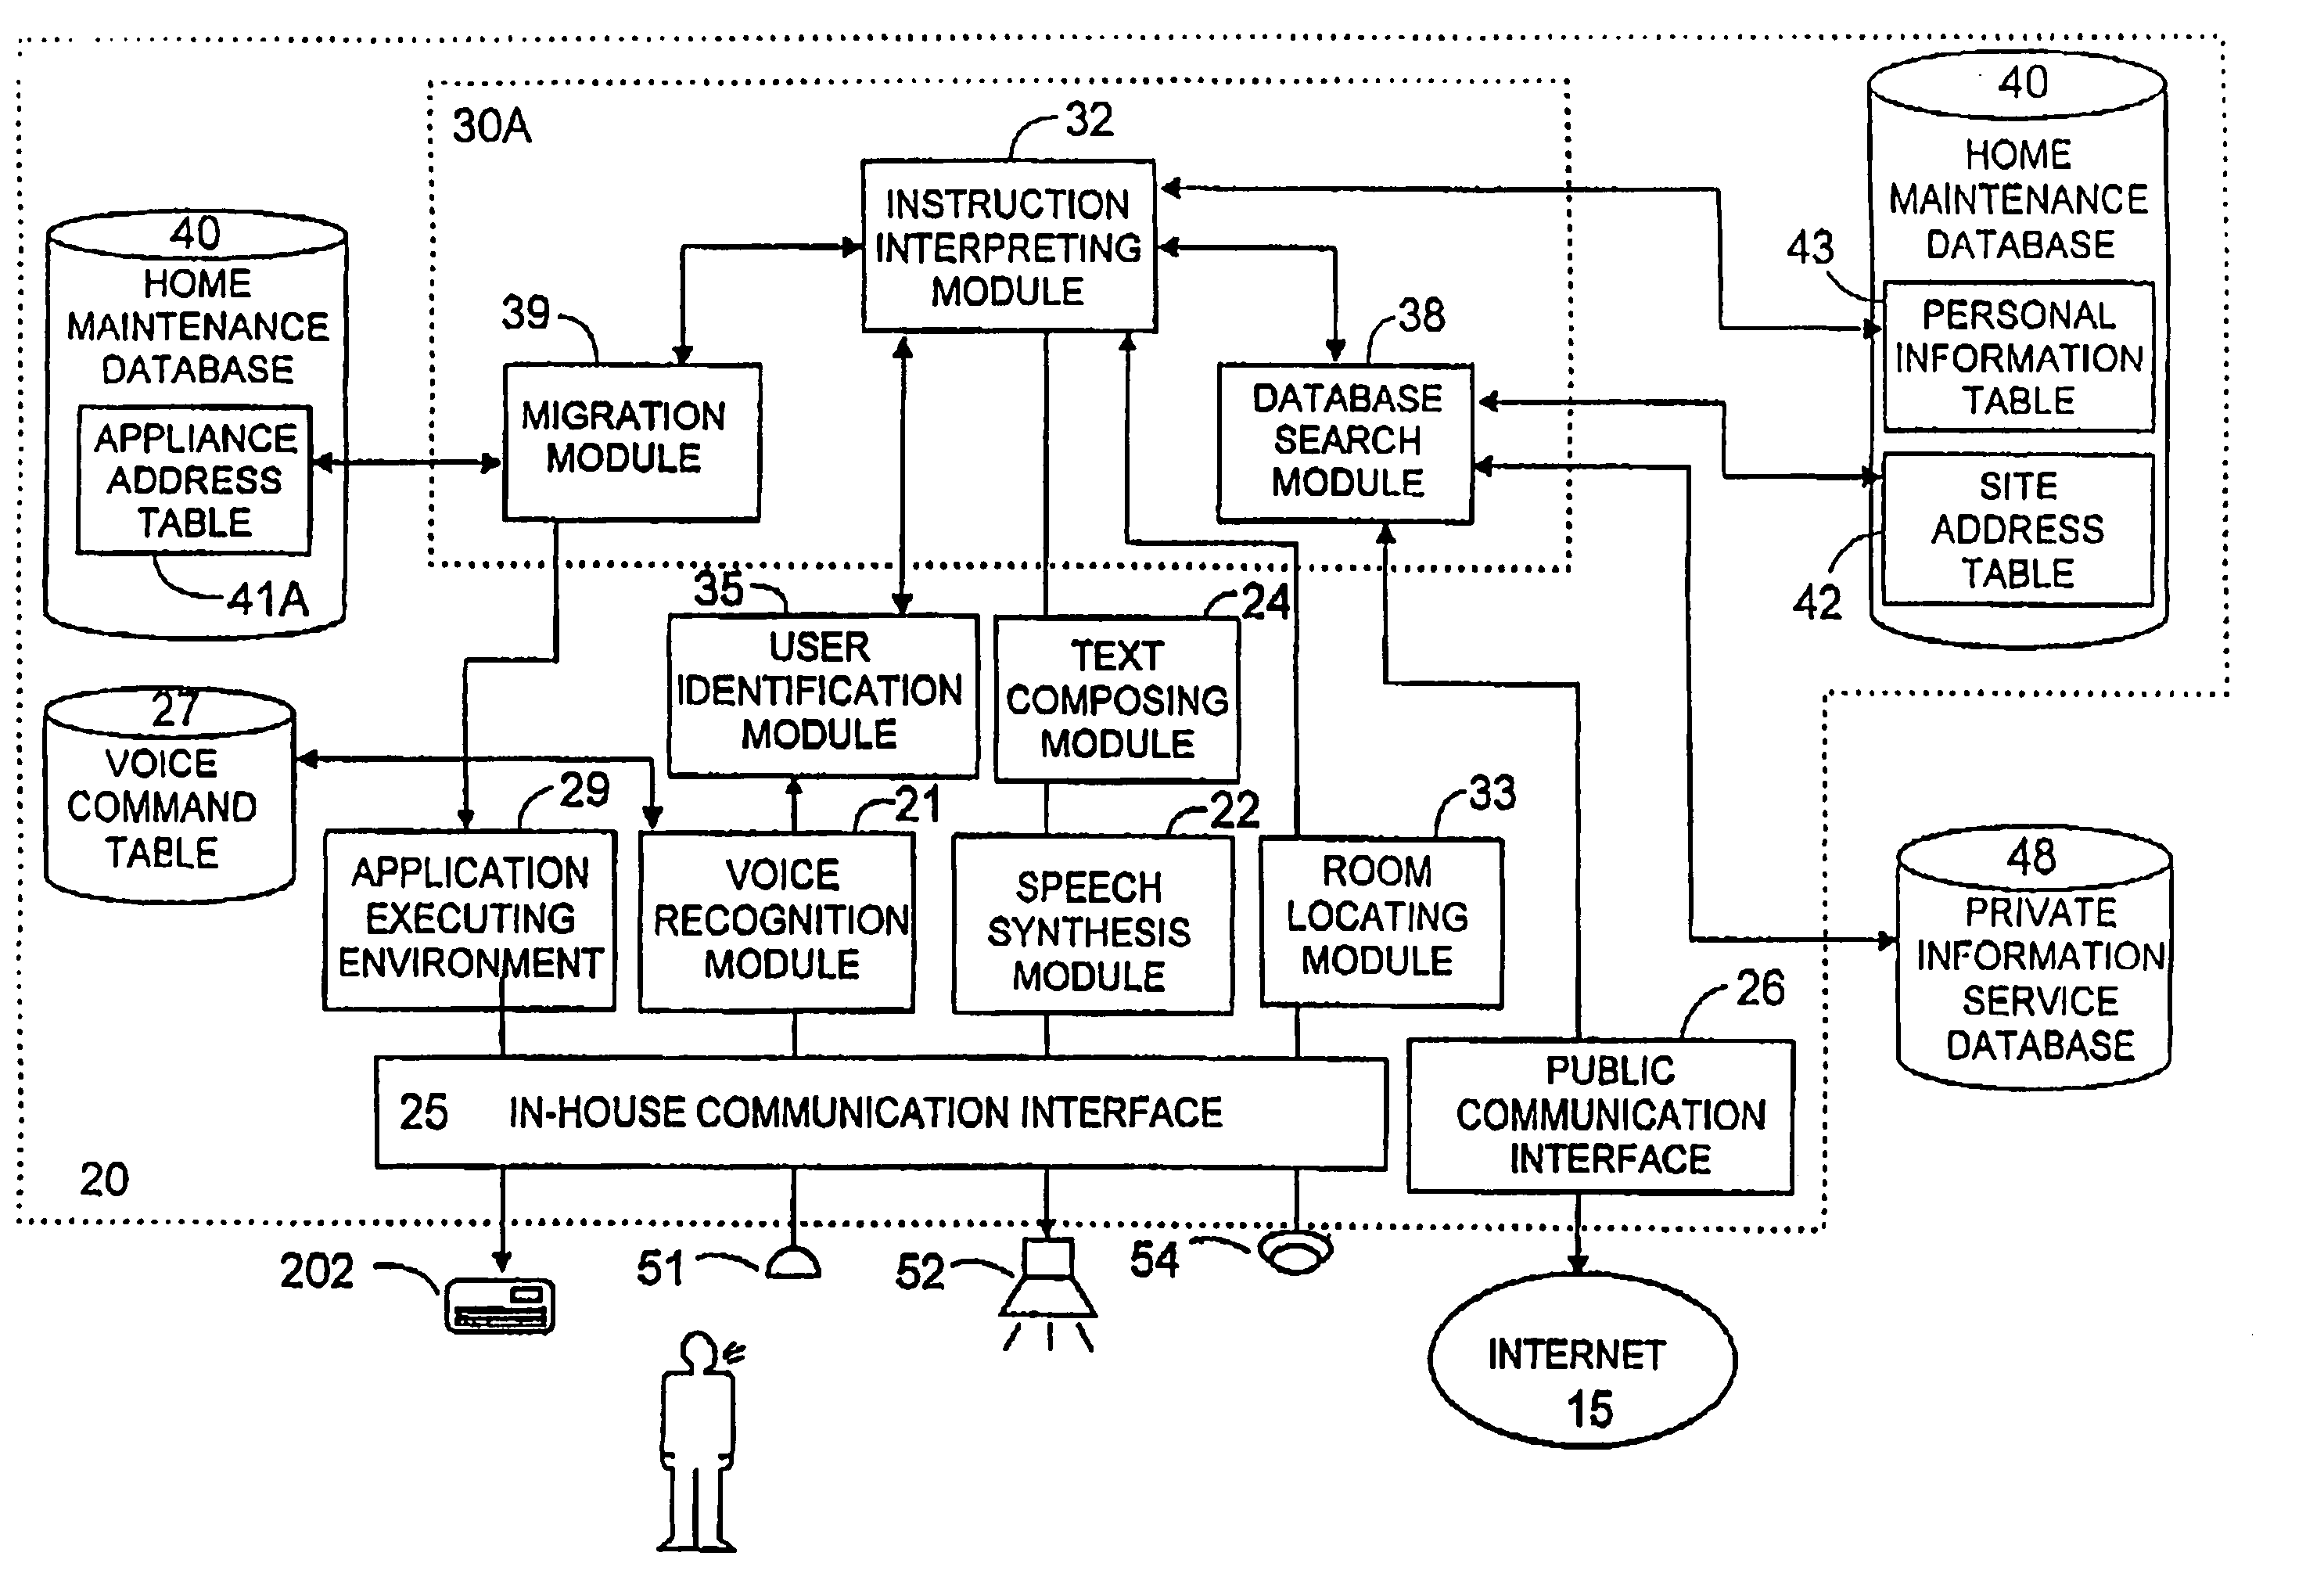 Voice control system for operating home electrical appliances